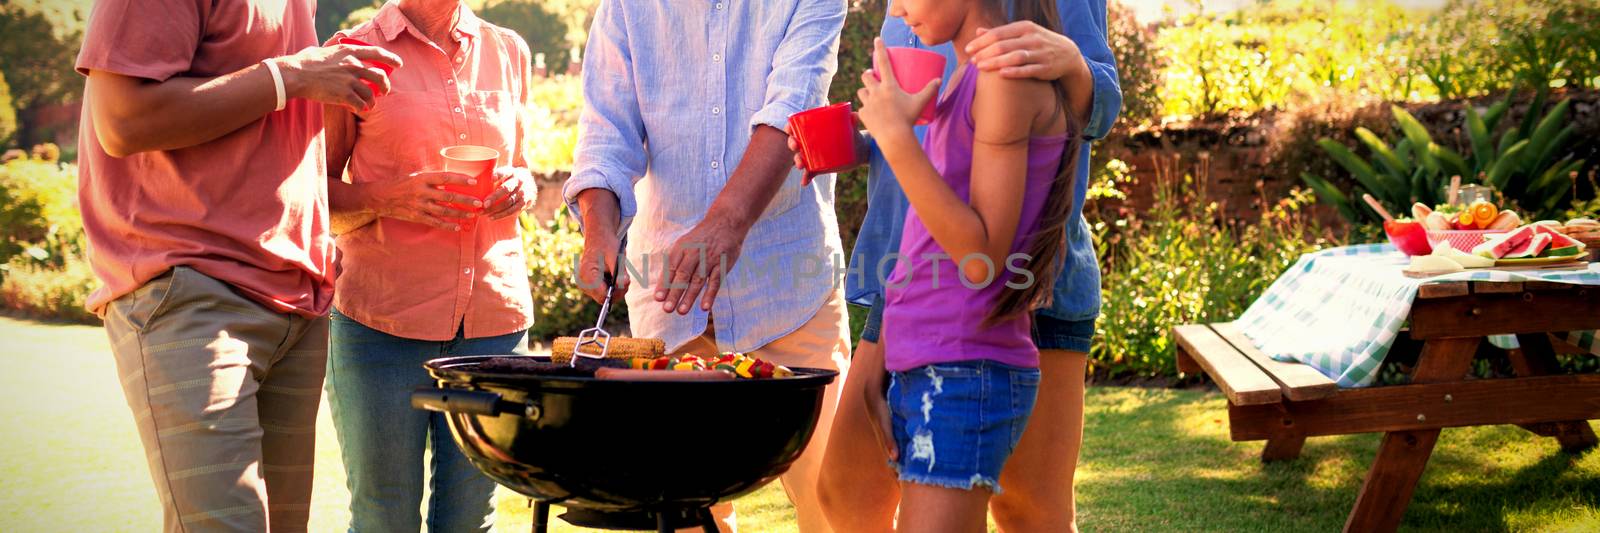 Family talking while preparing barbecue in the park by Wavebreakmedia